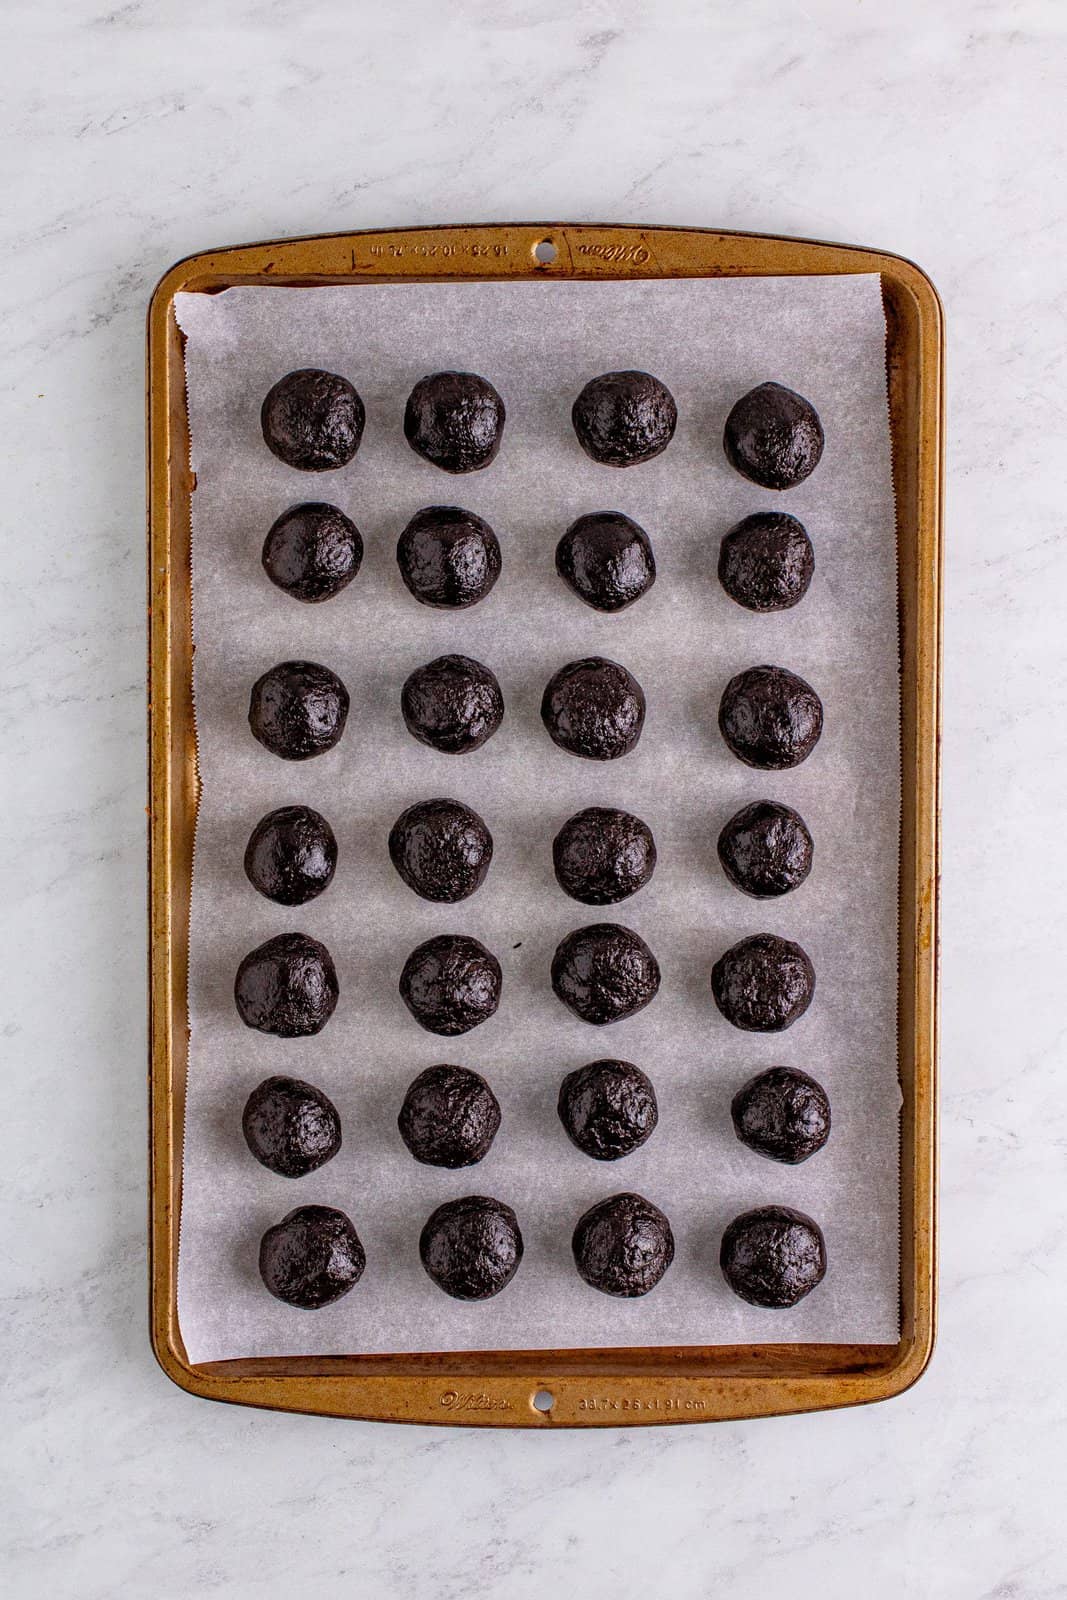 cookie balls shown on parchment paper on a cookie sheet.